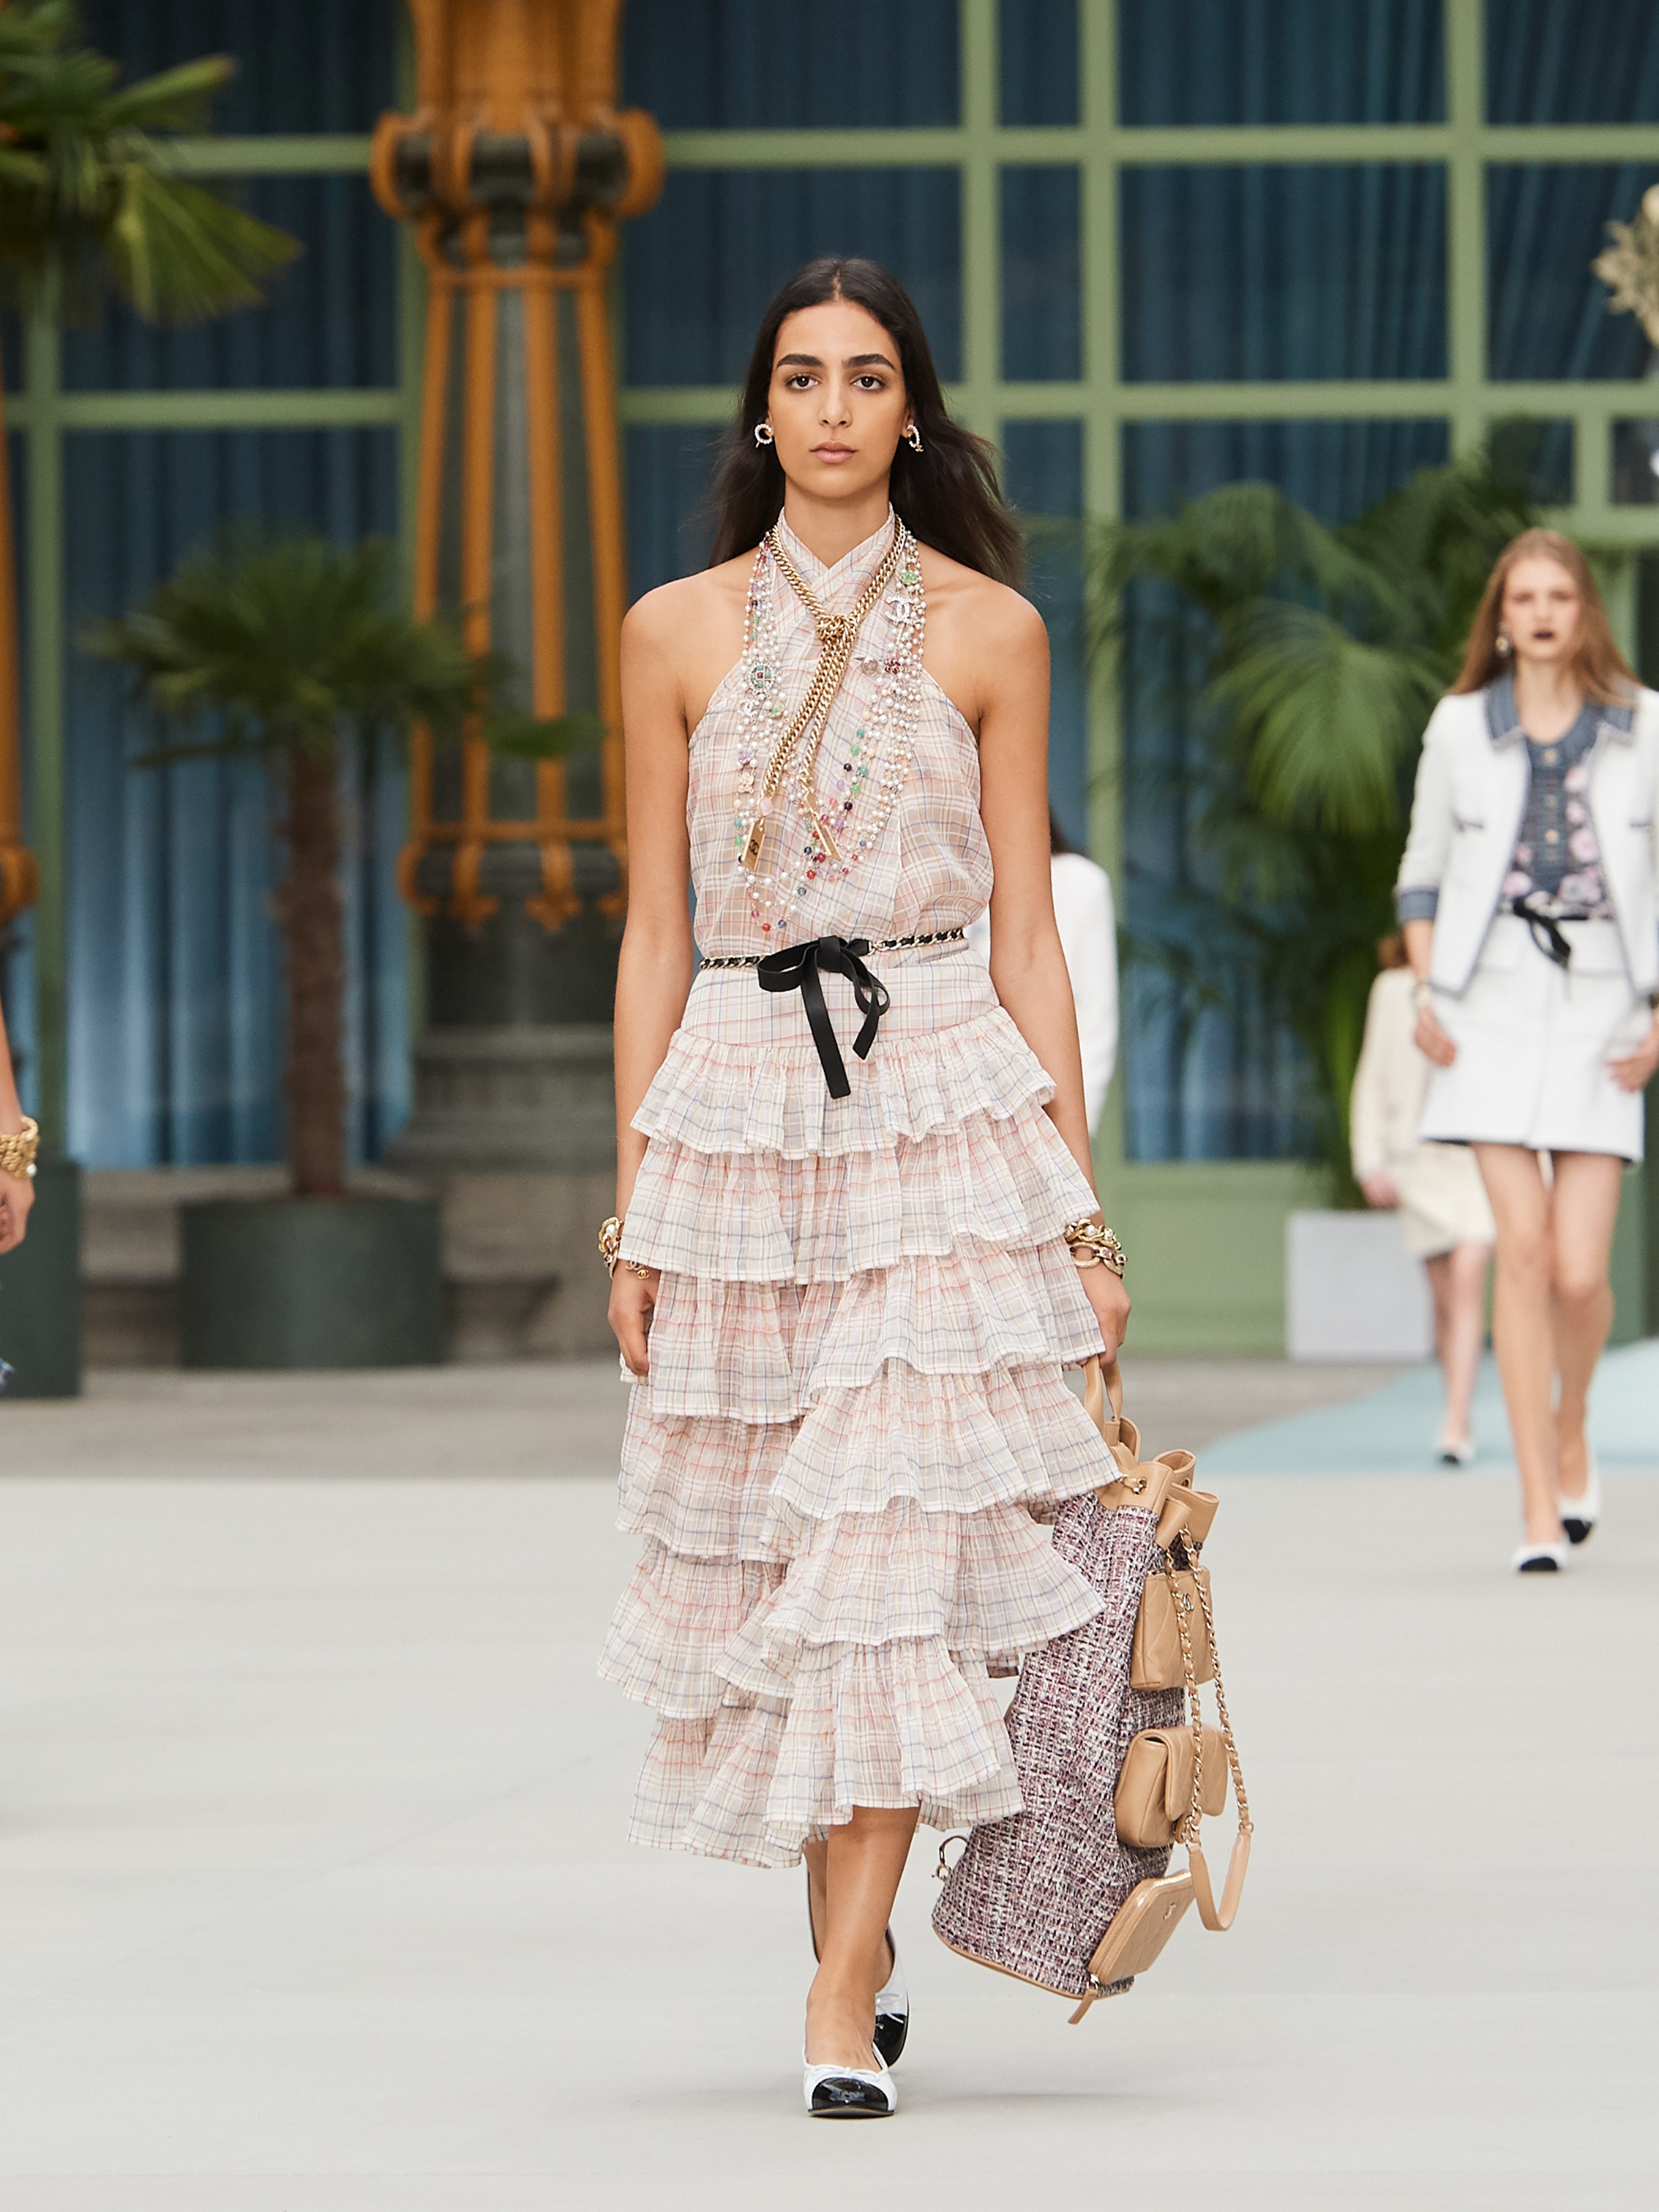 Chanel Cruise 2020, Courtesy of Chanel